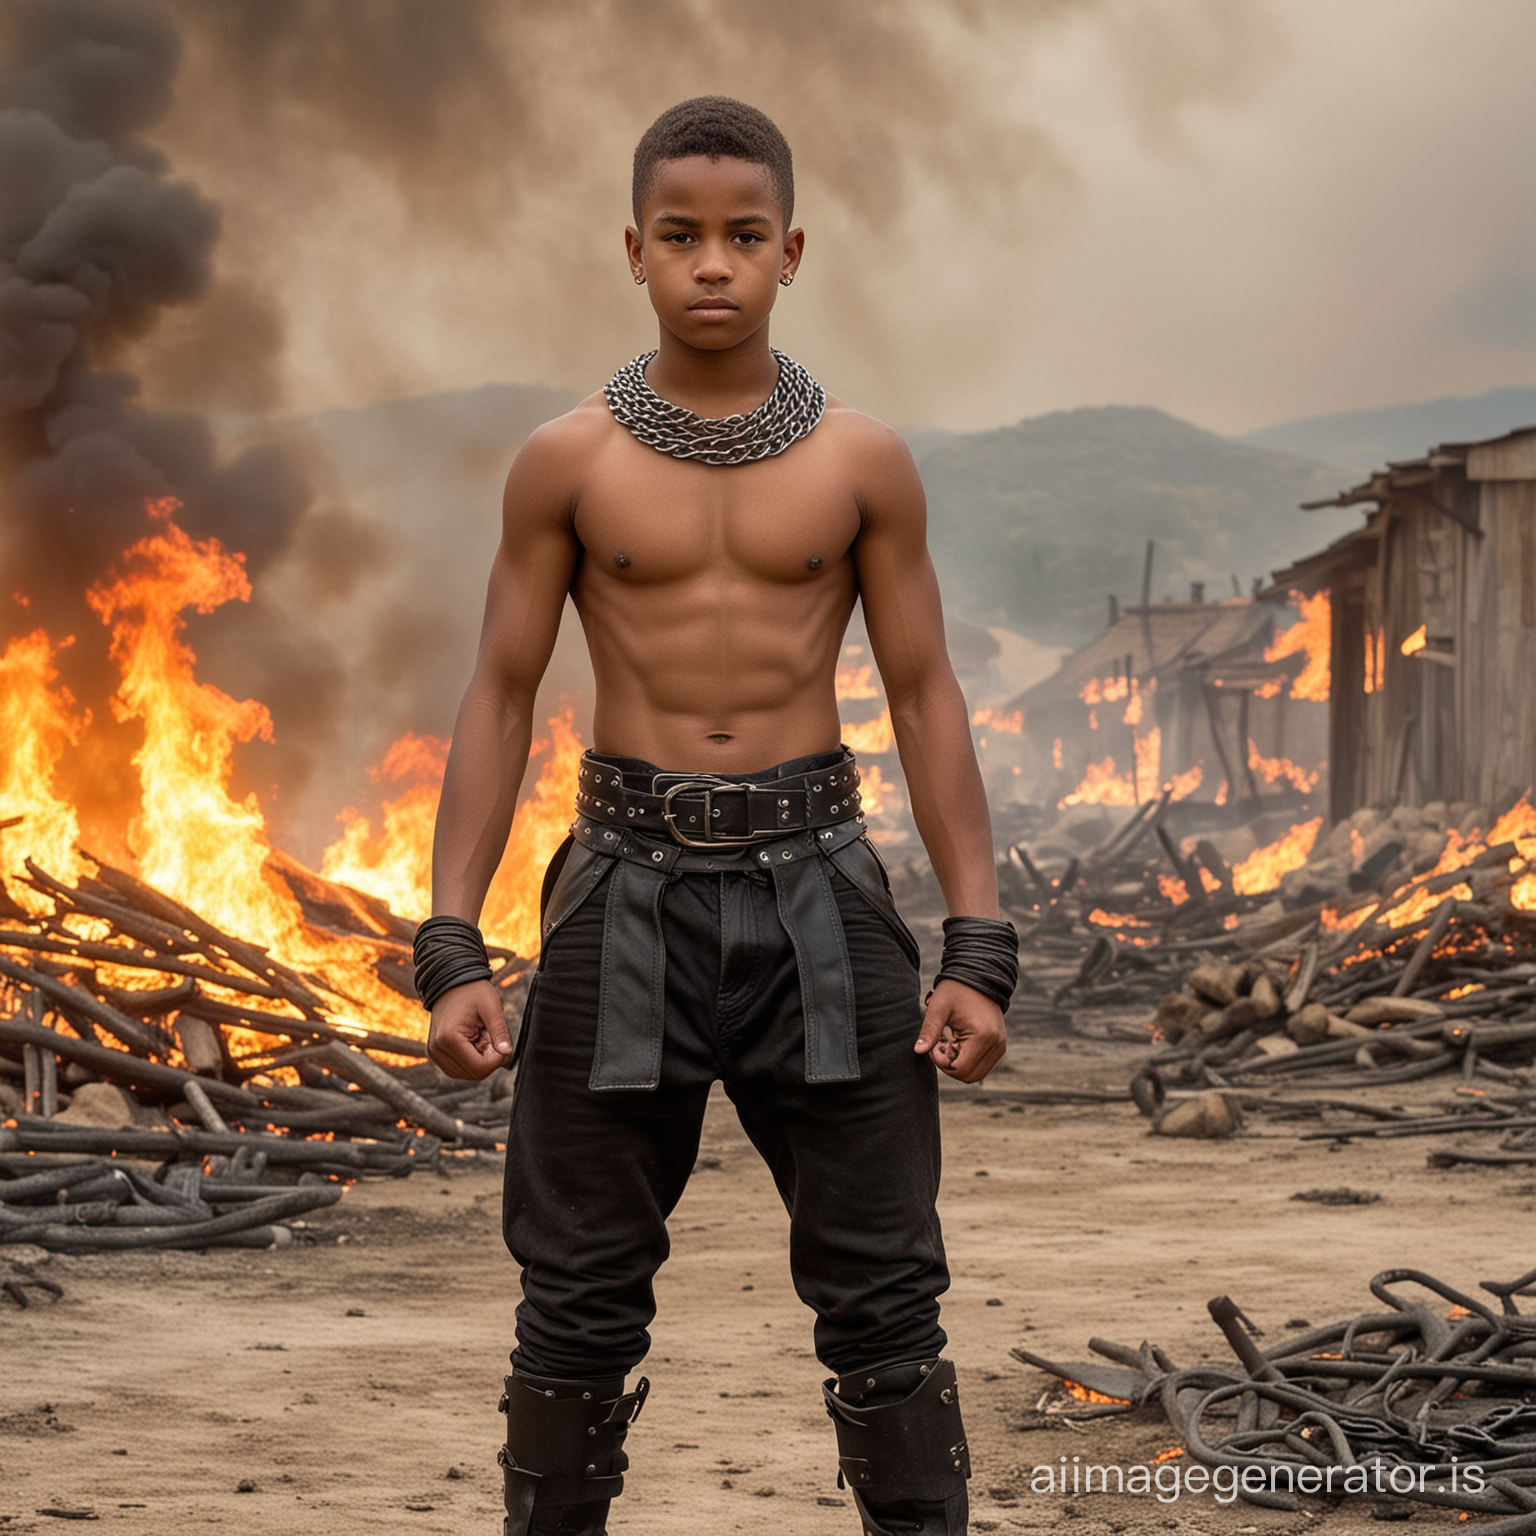 A very young black shirtless muscular teenage boy warrior and wearing a very short loincloth with chains, a big leather belt and boots and showing his biceps, a village on fire in the background.